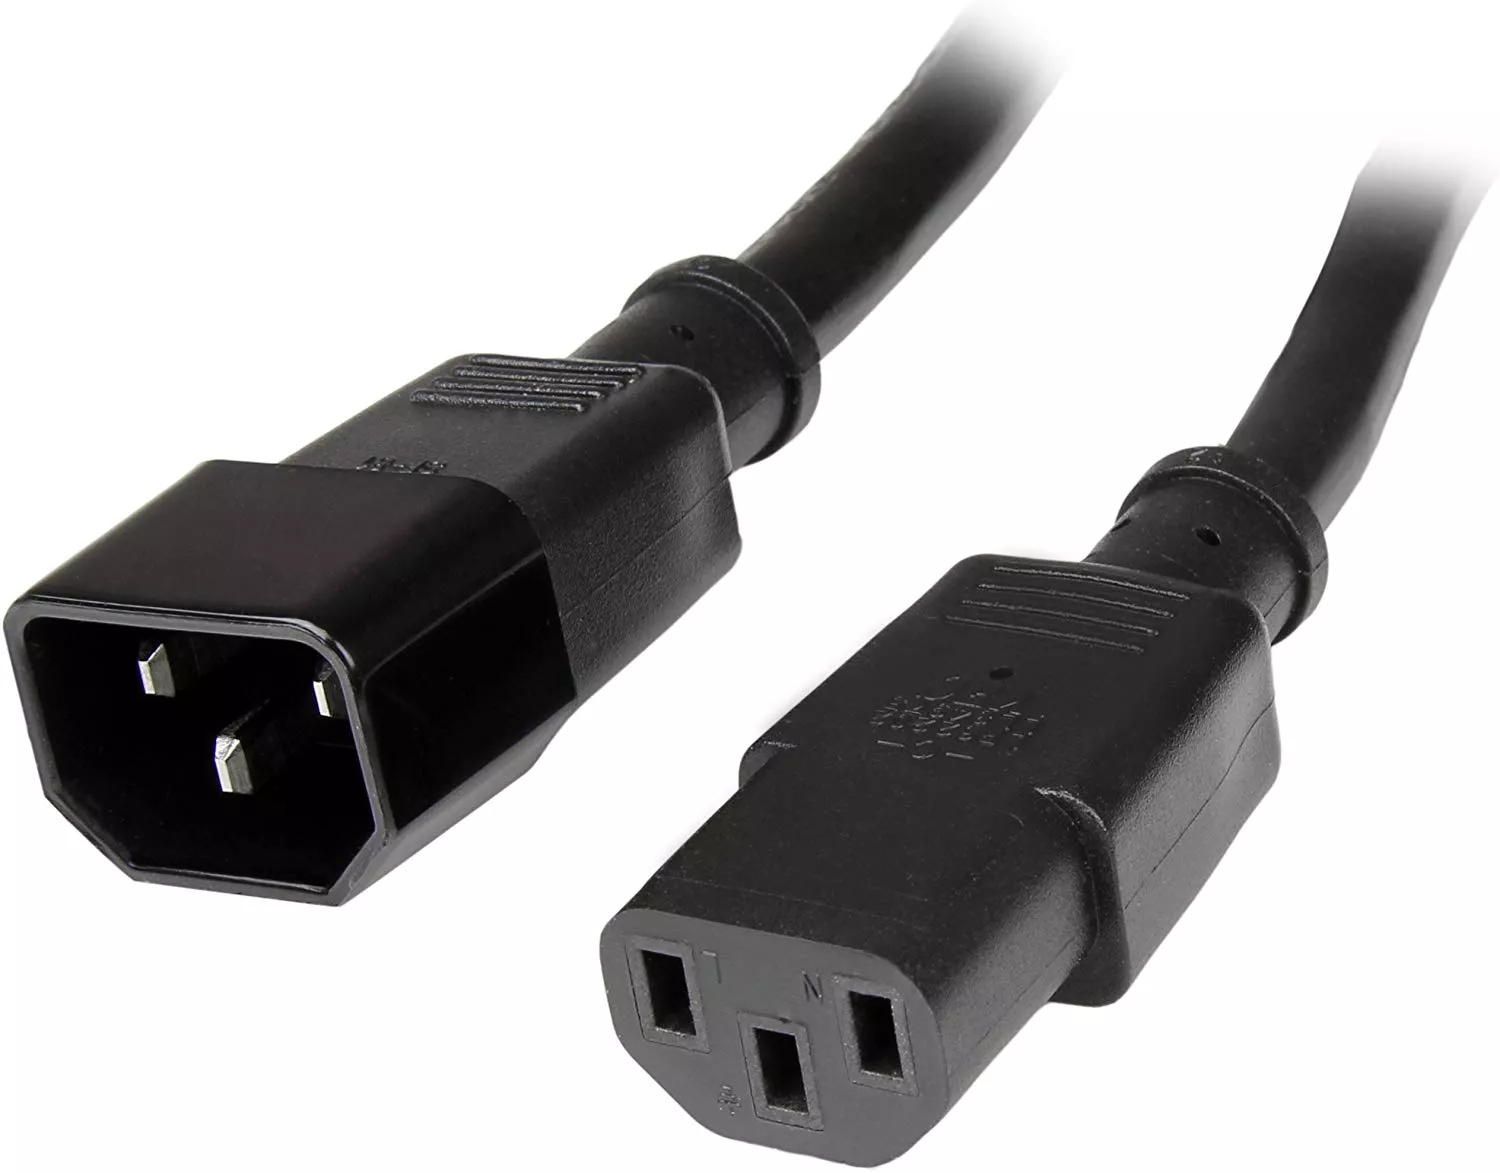 https://www.xgamertechnologies.com/images/products/Standard Computer Power Cord Extension { back to back UPS cable c13 to c14 }.webp